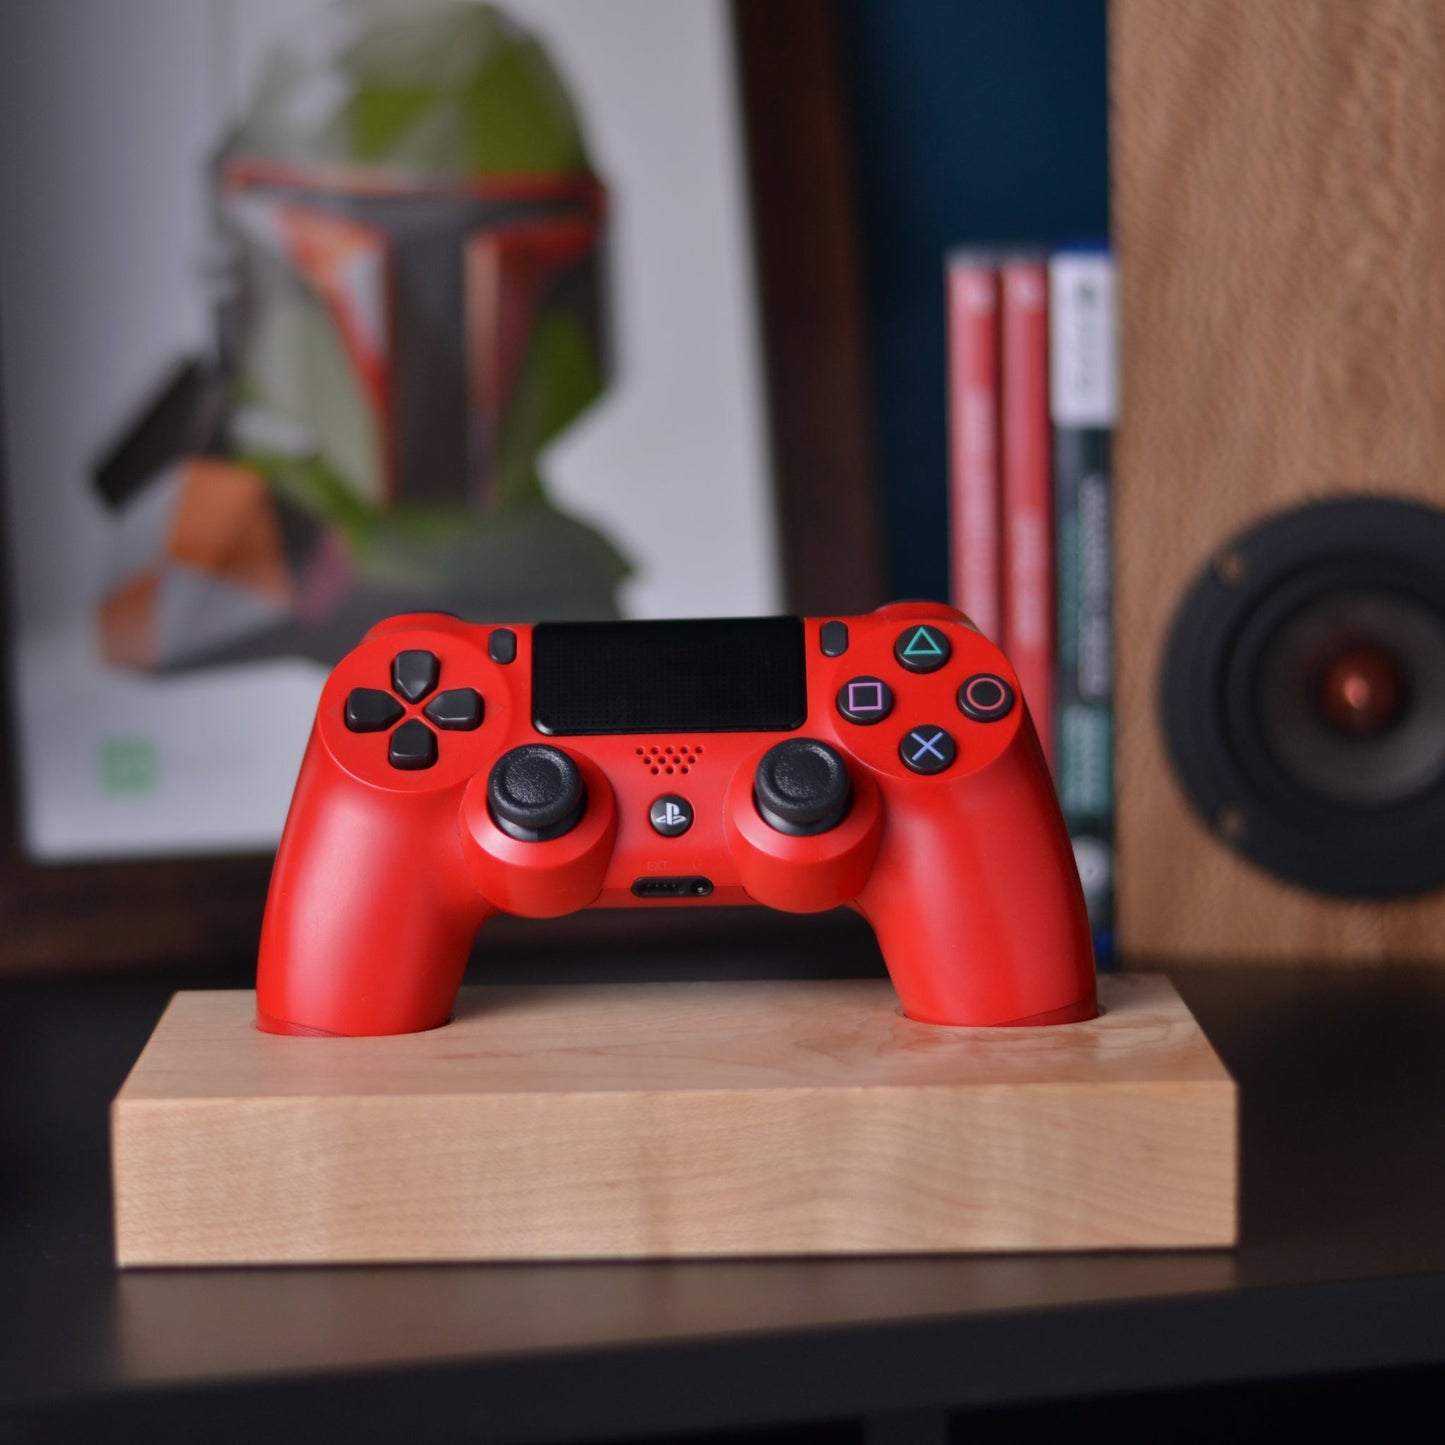 Wooden stand for Playstation 4 dualshock controller